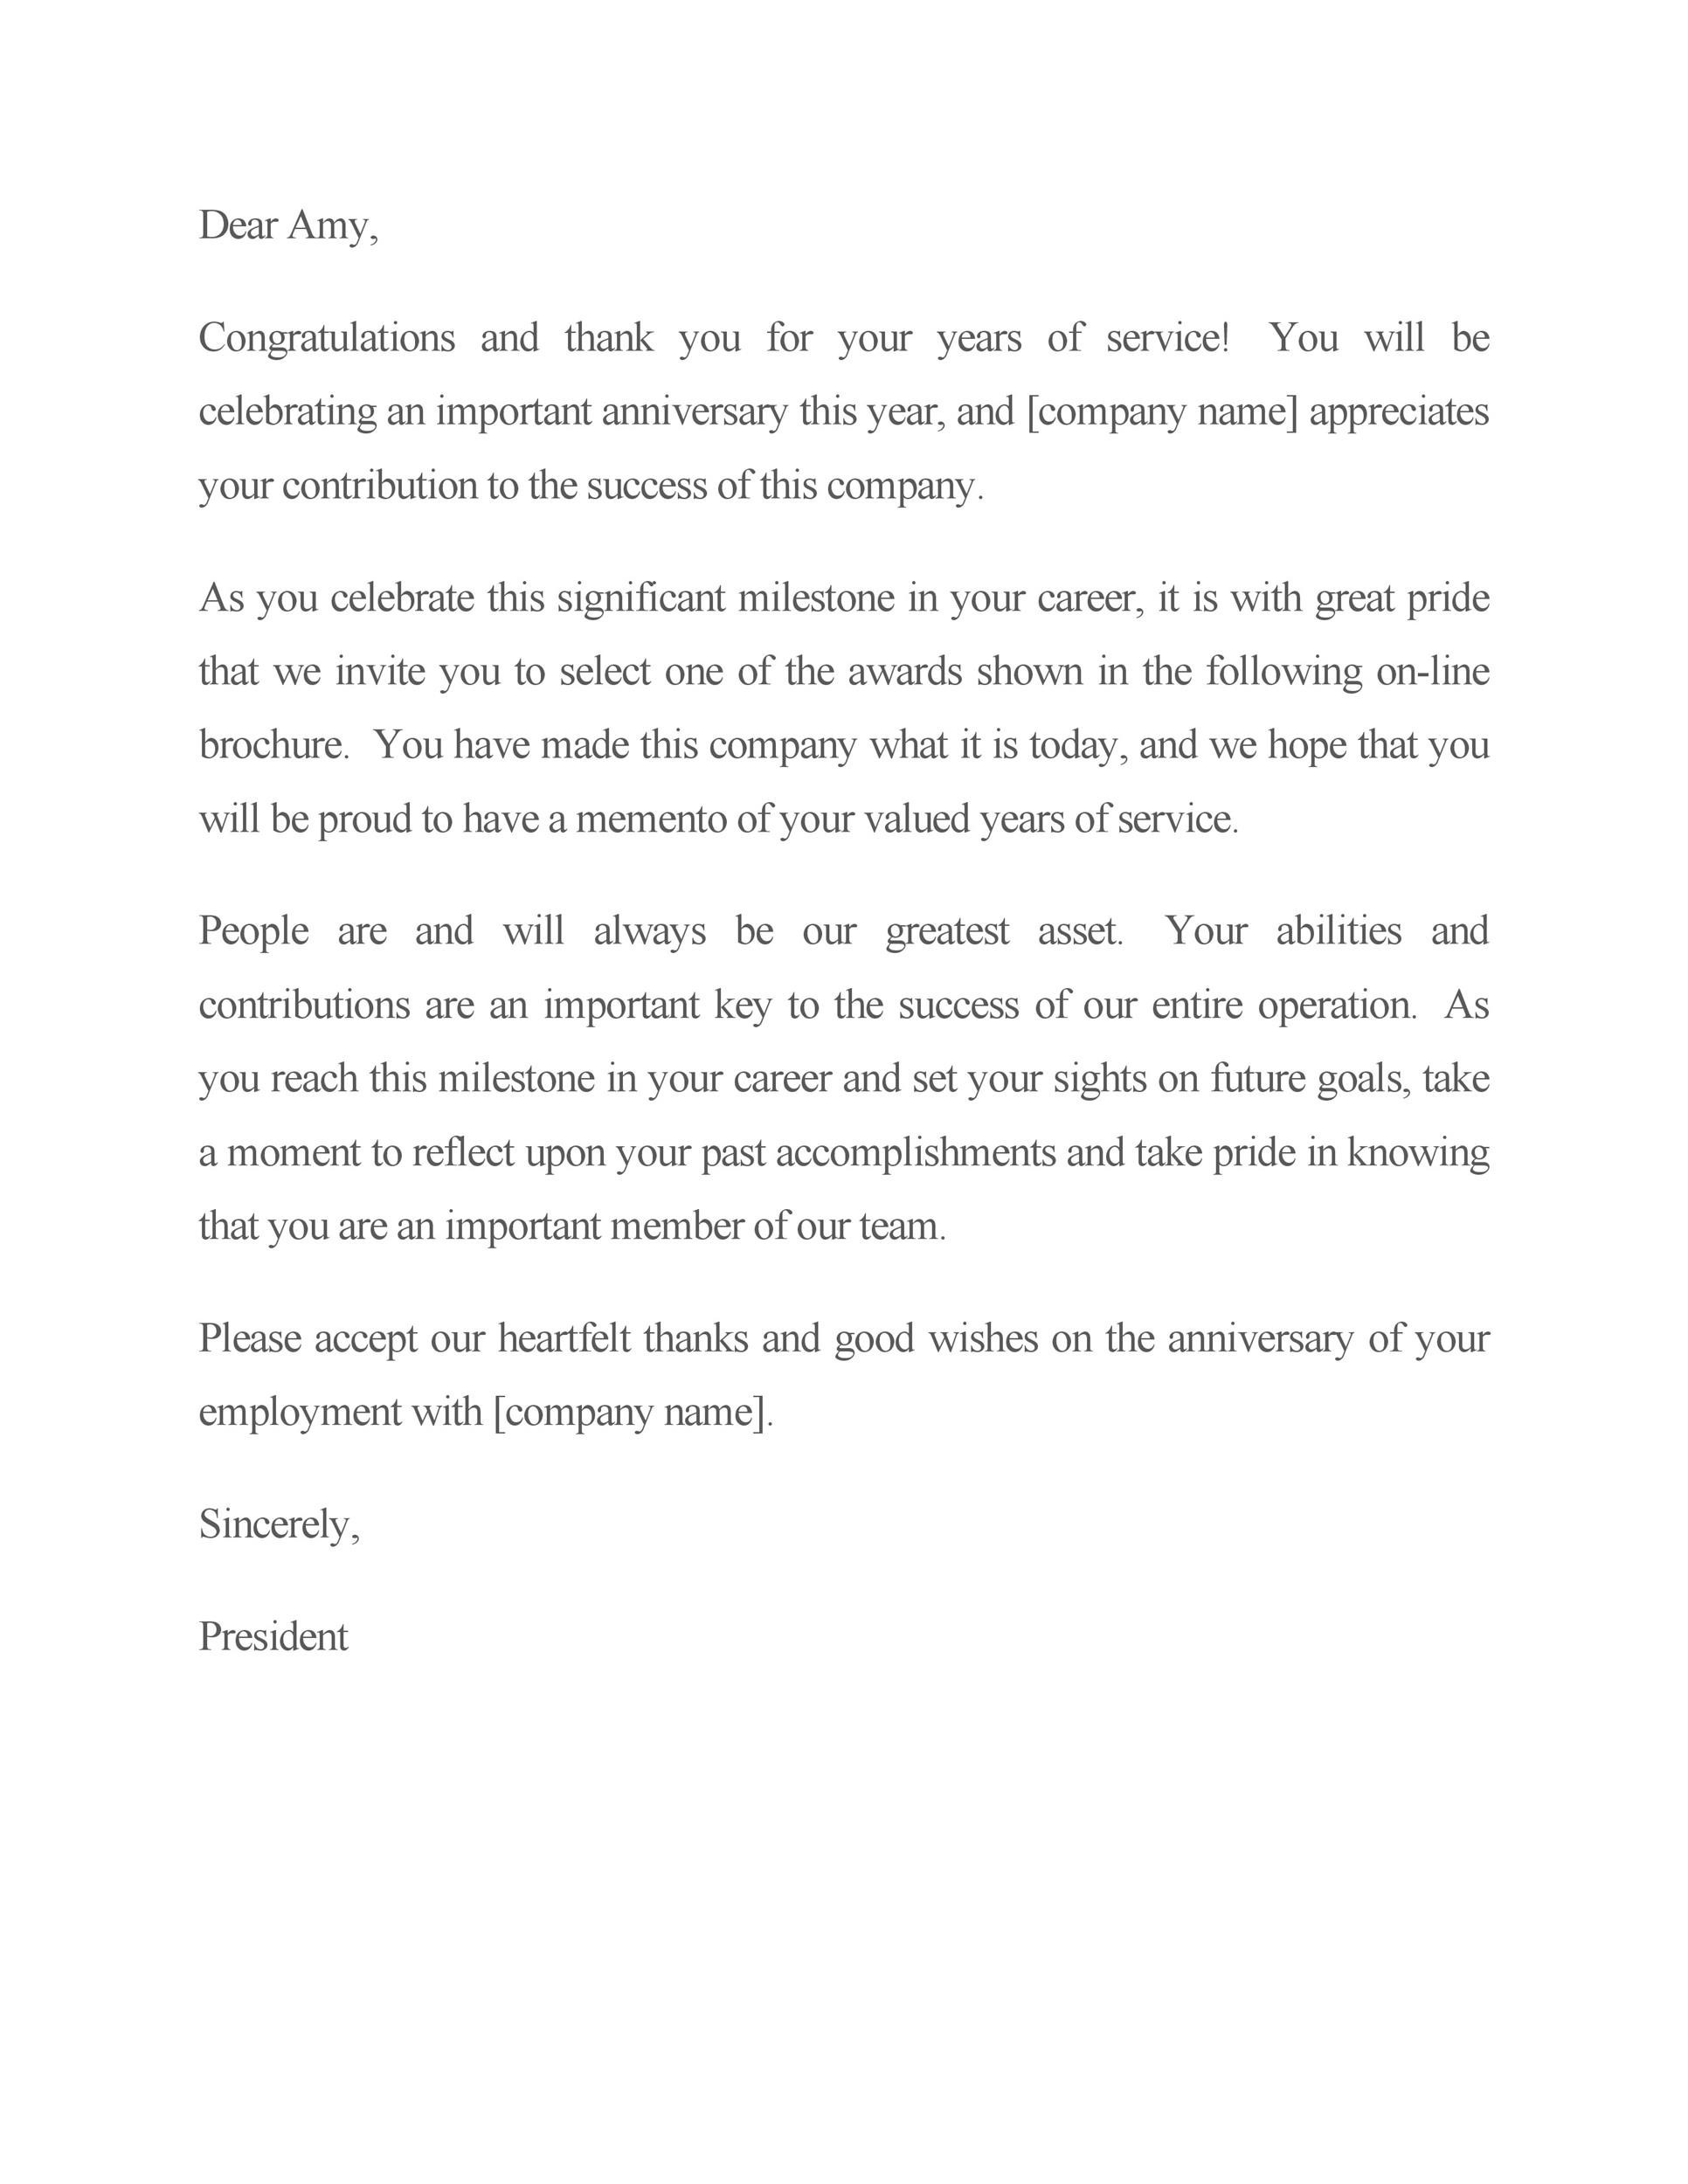 Free recognition letter 21